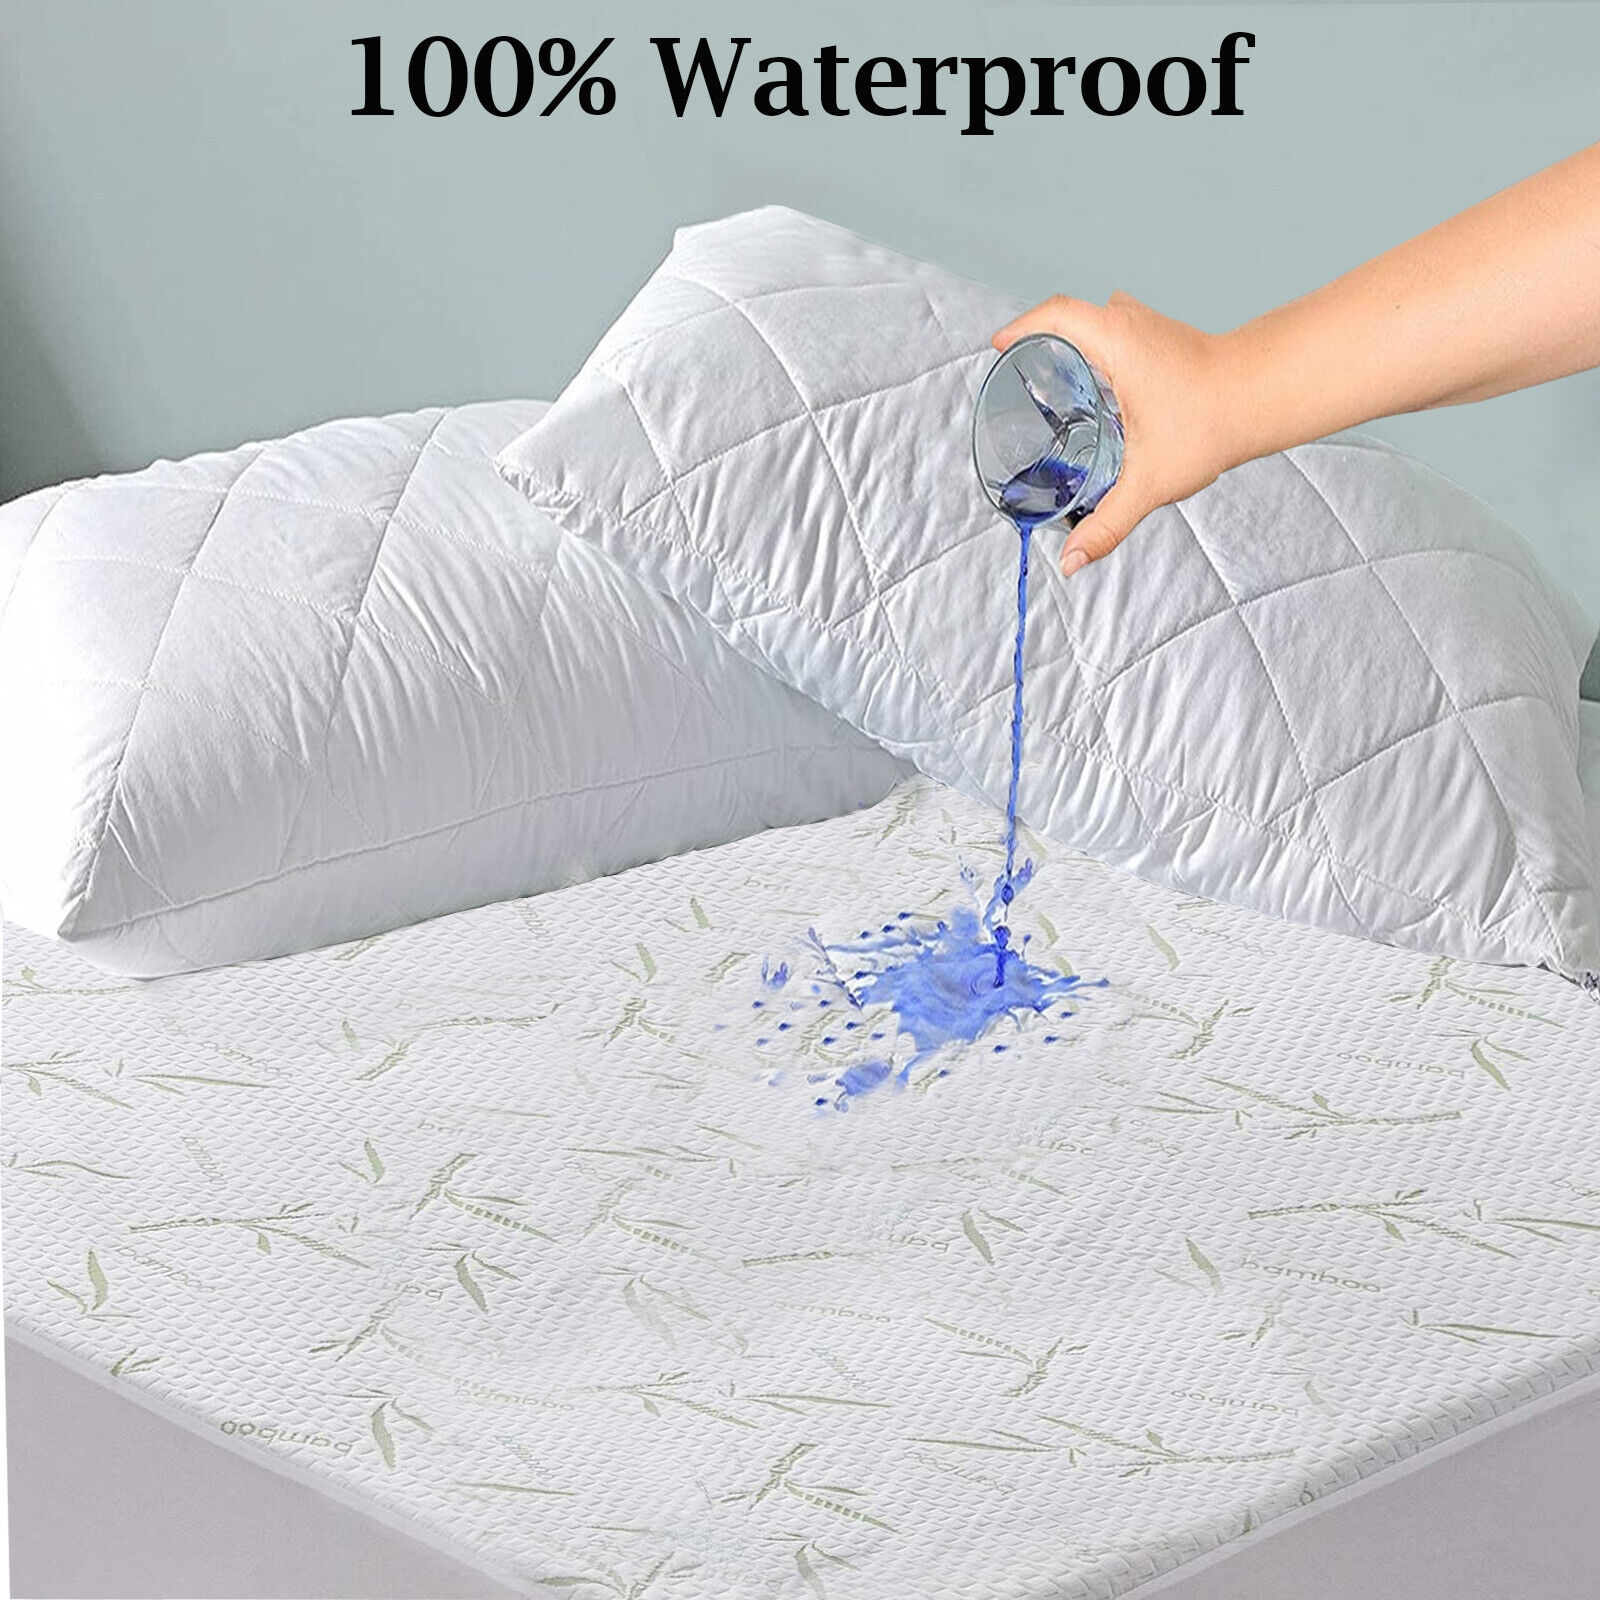 Bamboo Waterproof Mattress Protector Quilted Breathable Premium Mattress Cover